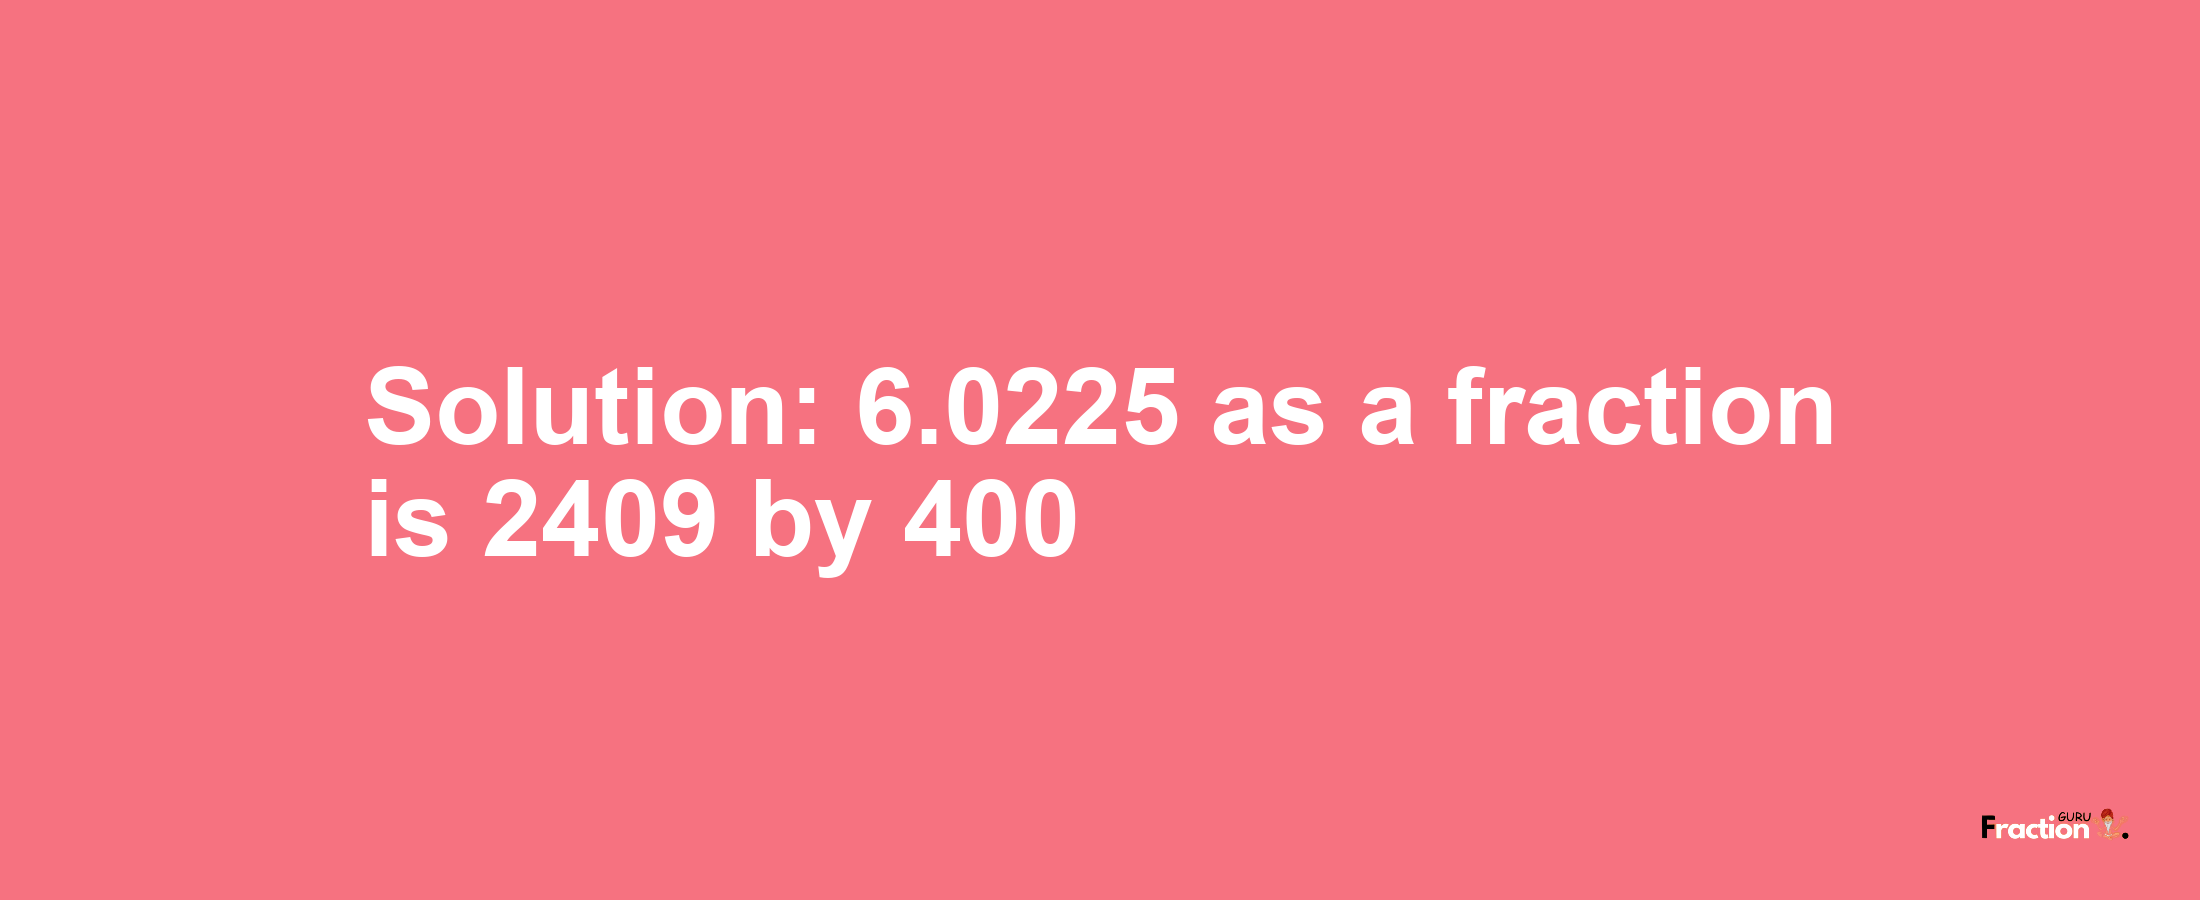 Solution:6.0225 as a fraction is 2409/400